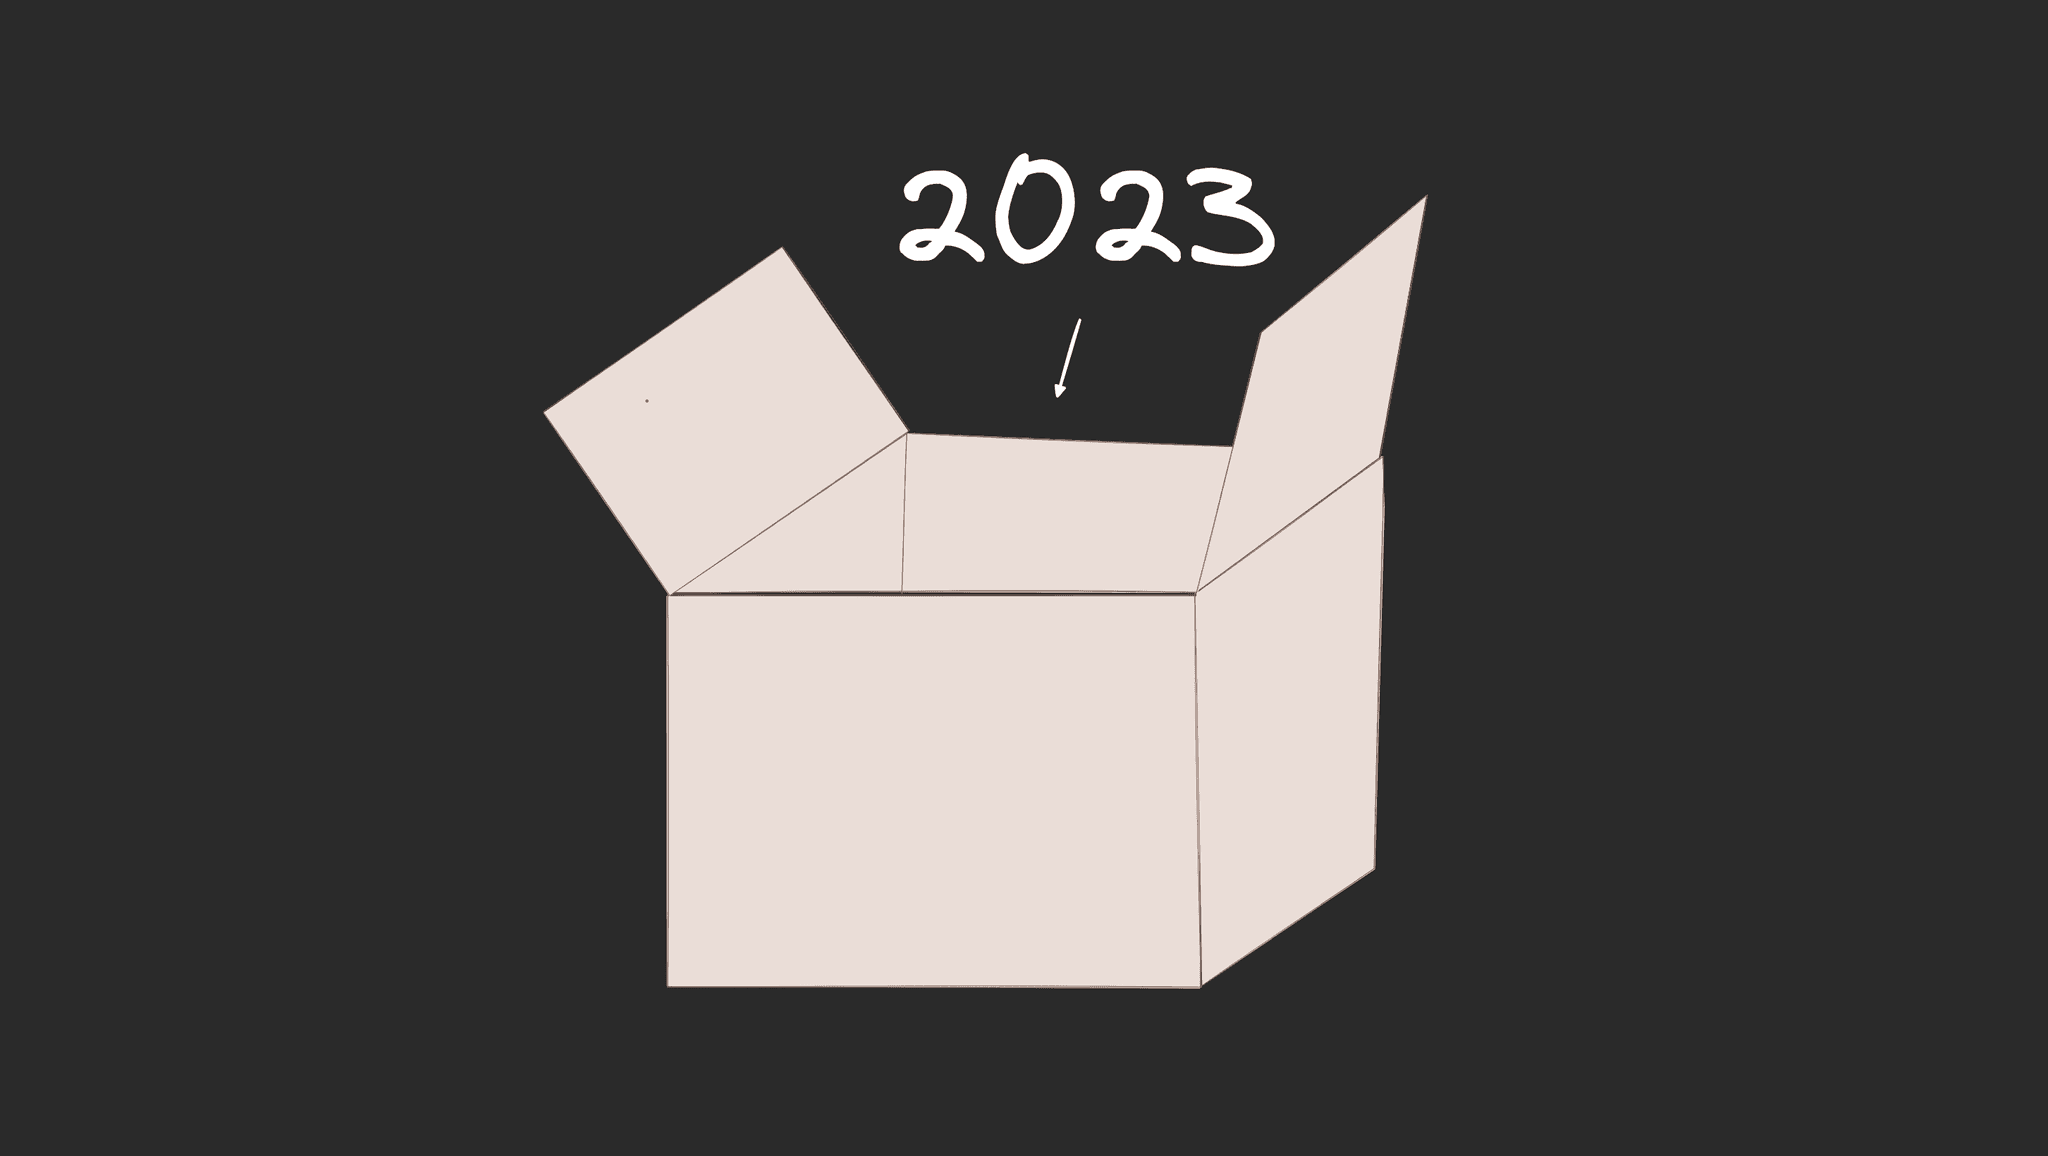 An image depicting the word "2k23" is getting wrapped inside a box. The best box I have ever drawn.